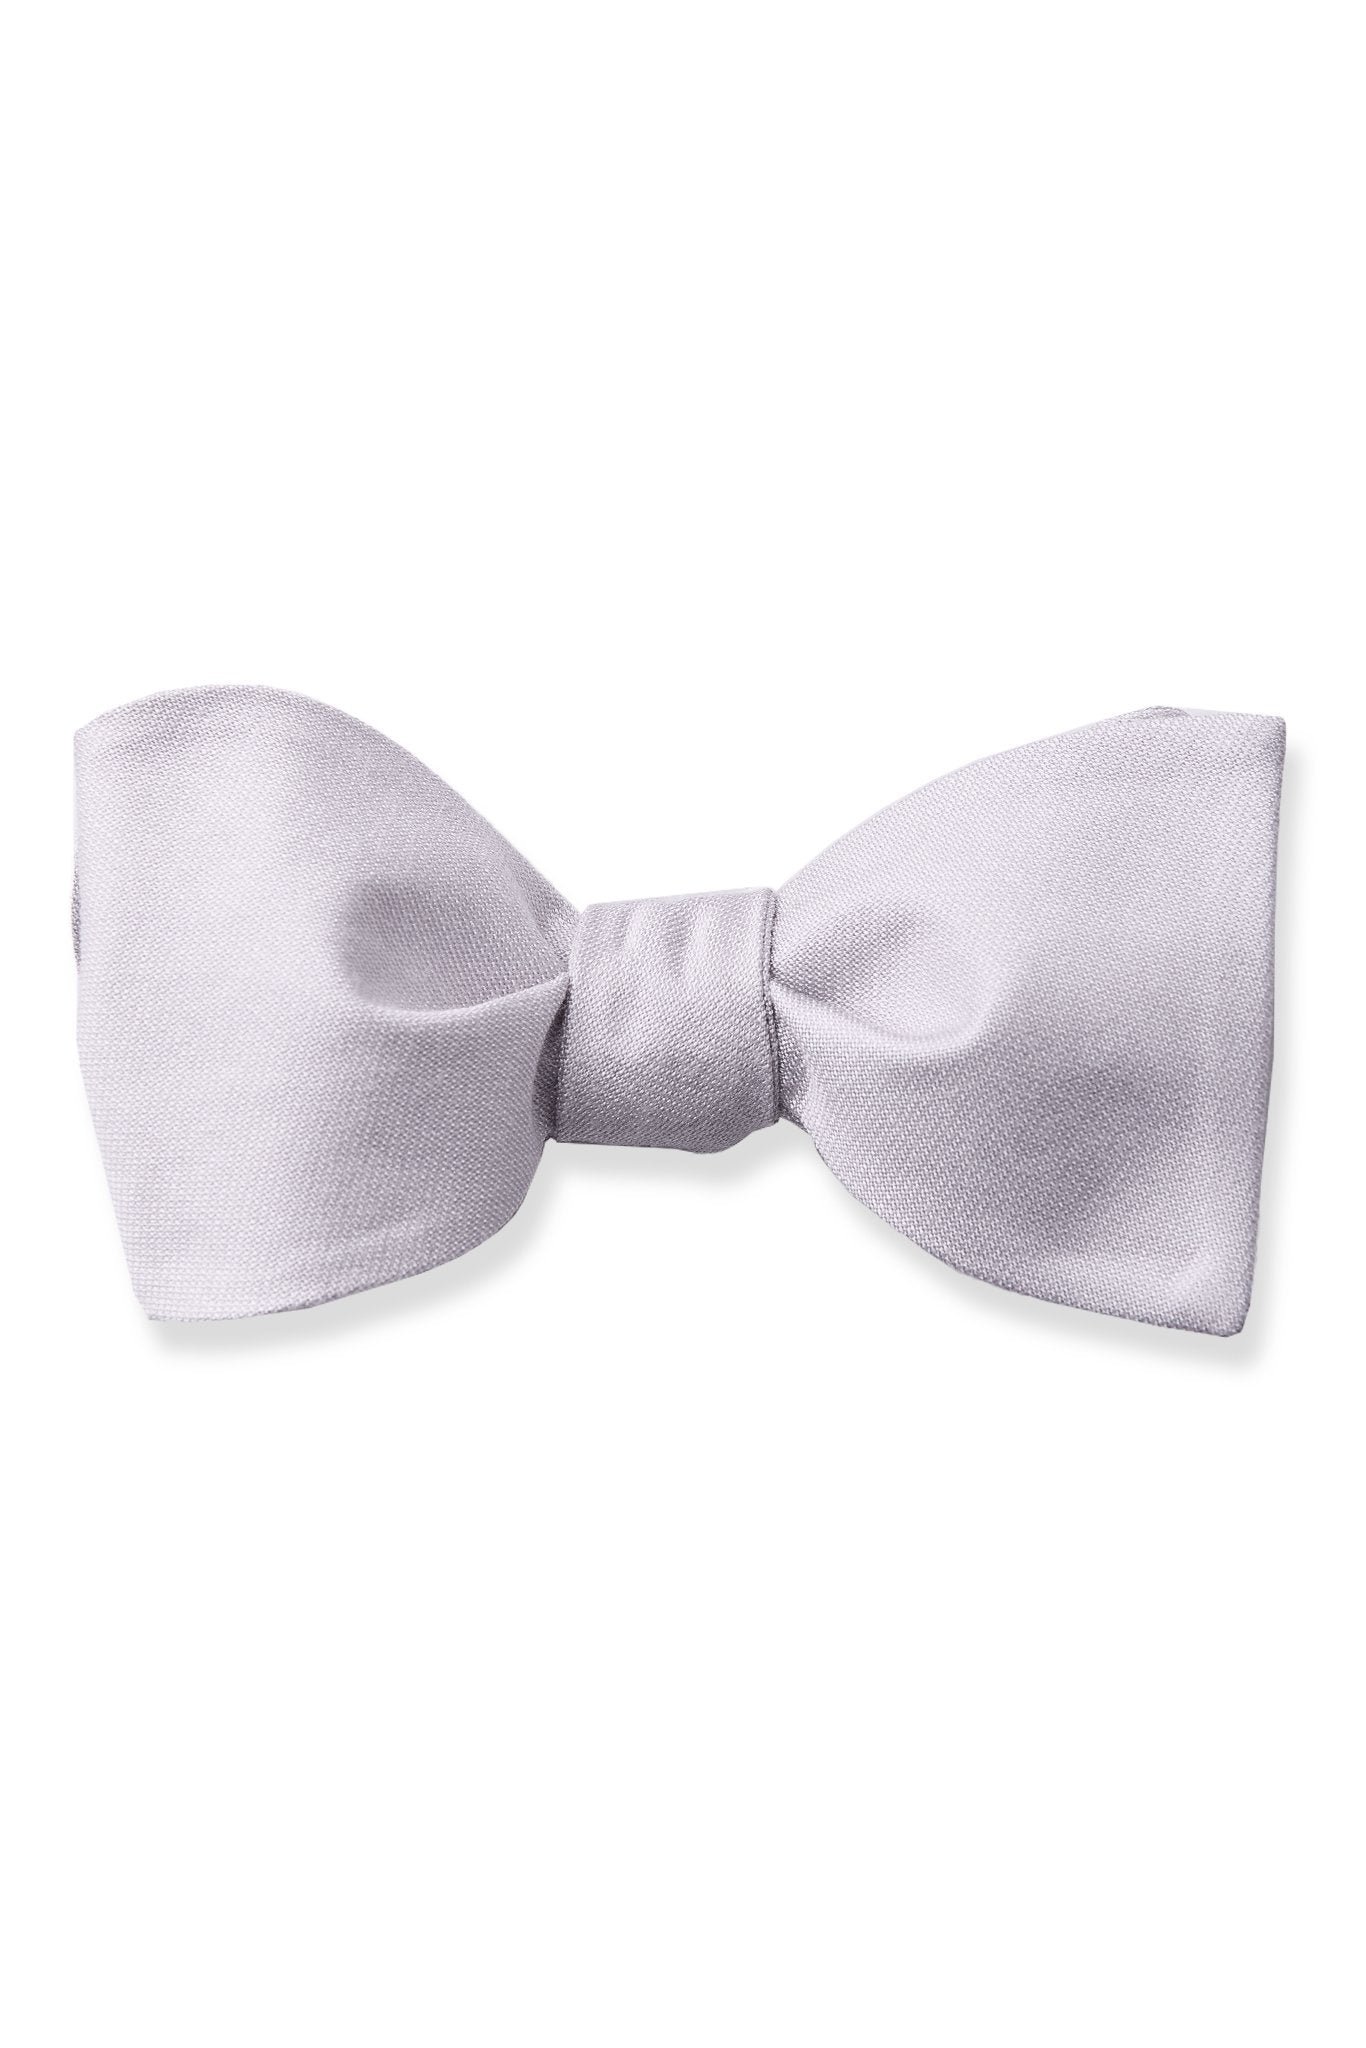 Daniel Bow Tie in lilac by Birdy Grey, front view